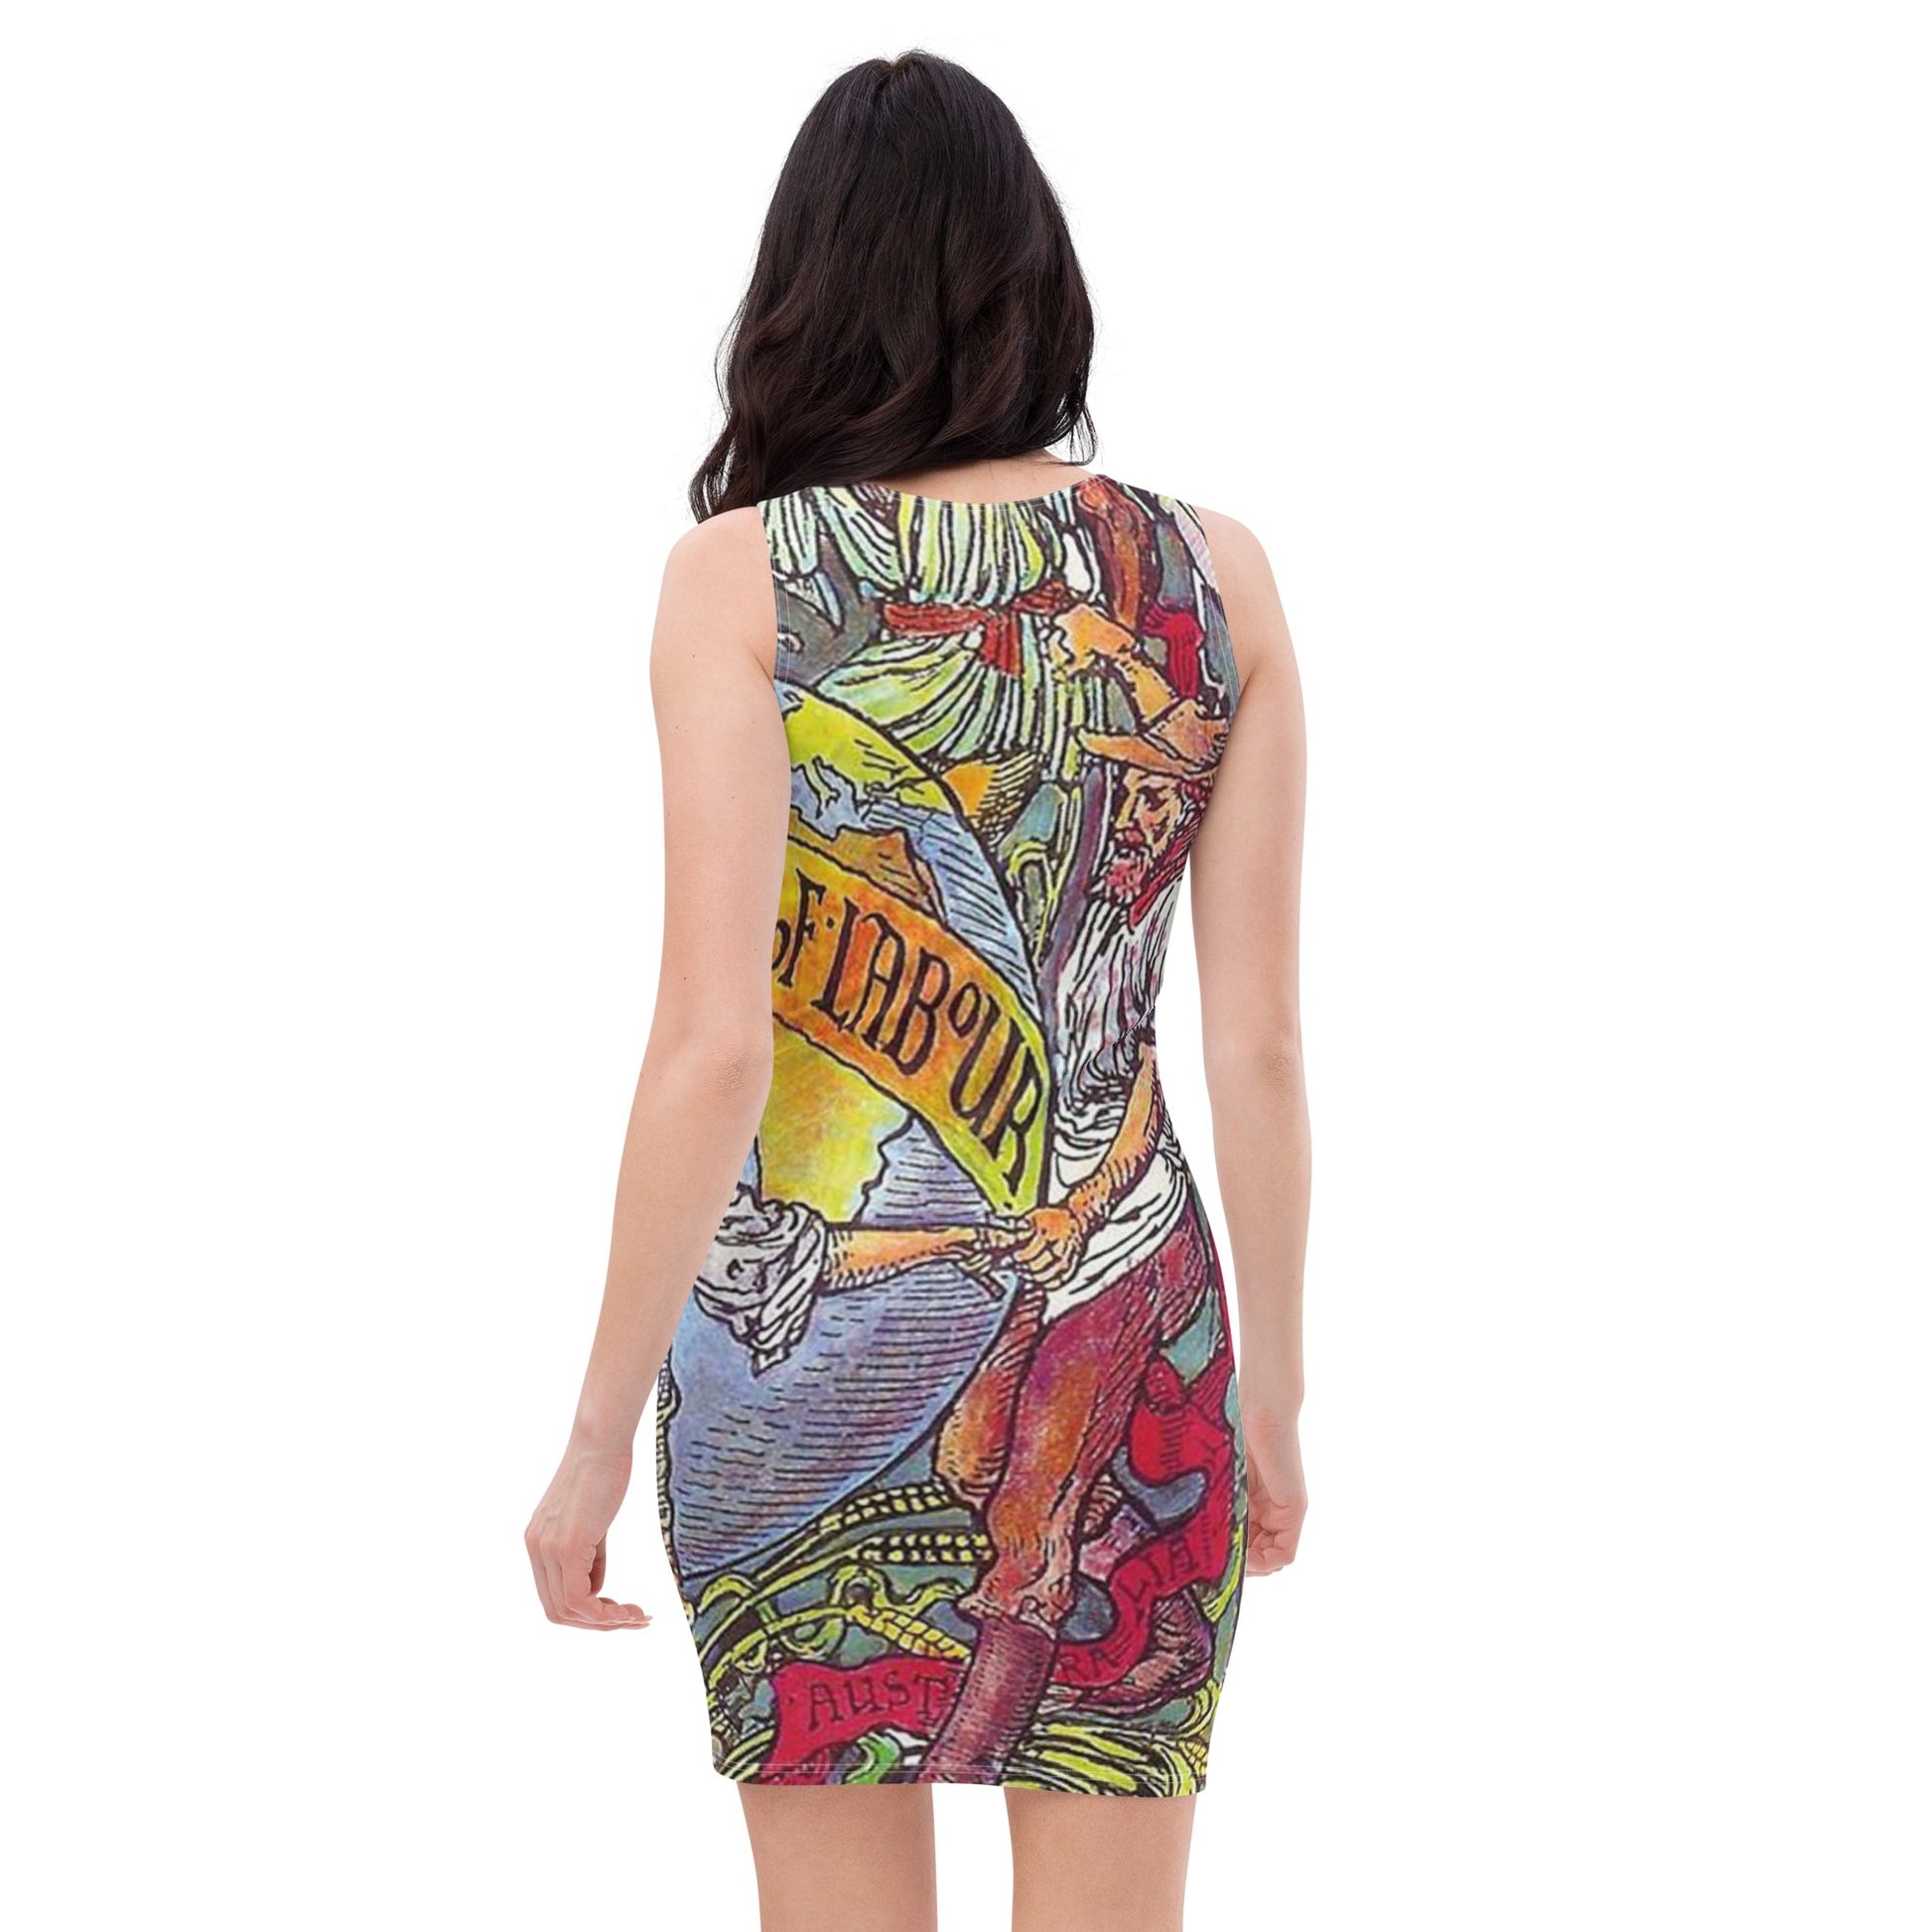 Solidarity - Bodycon dress - Souled Out World